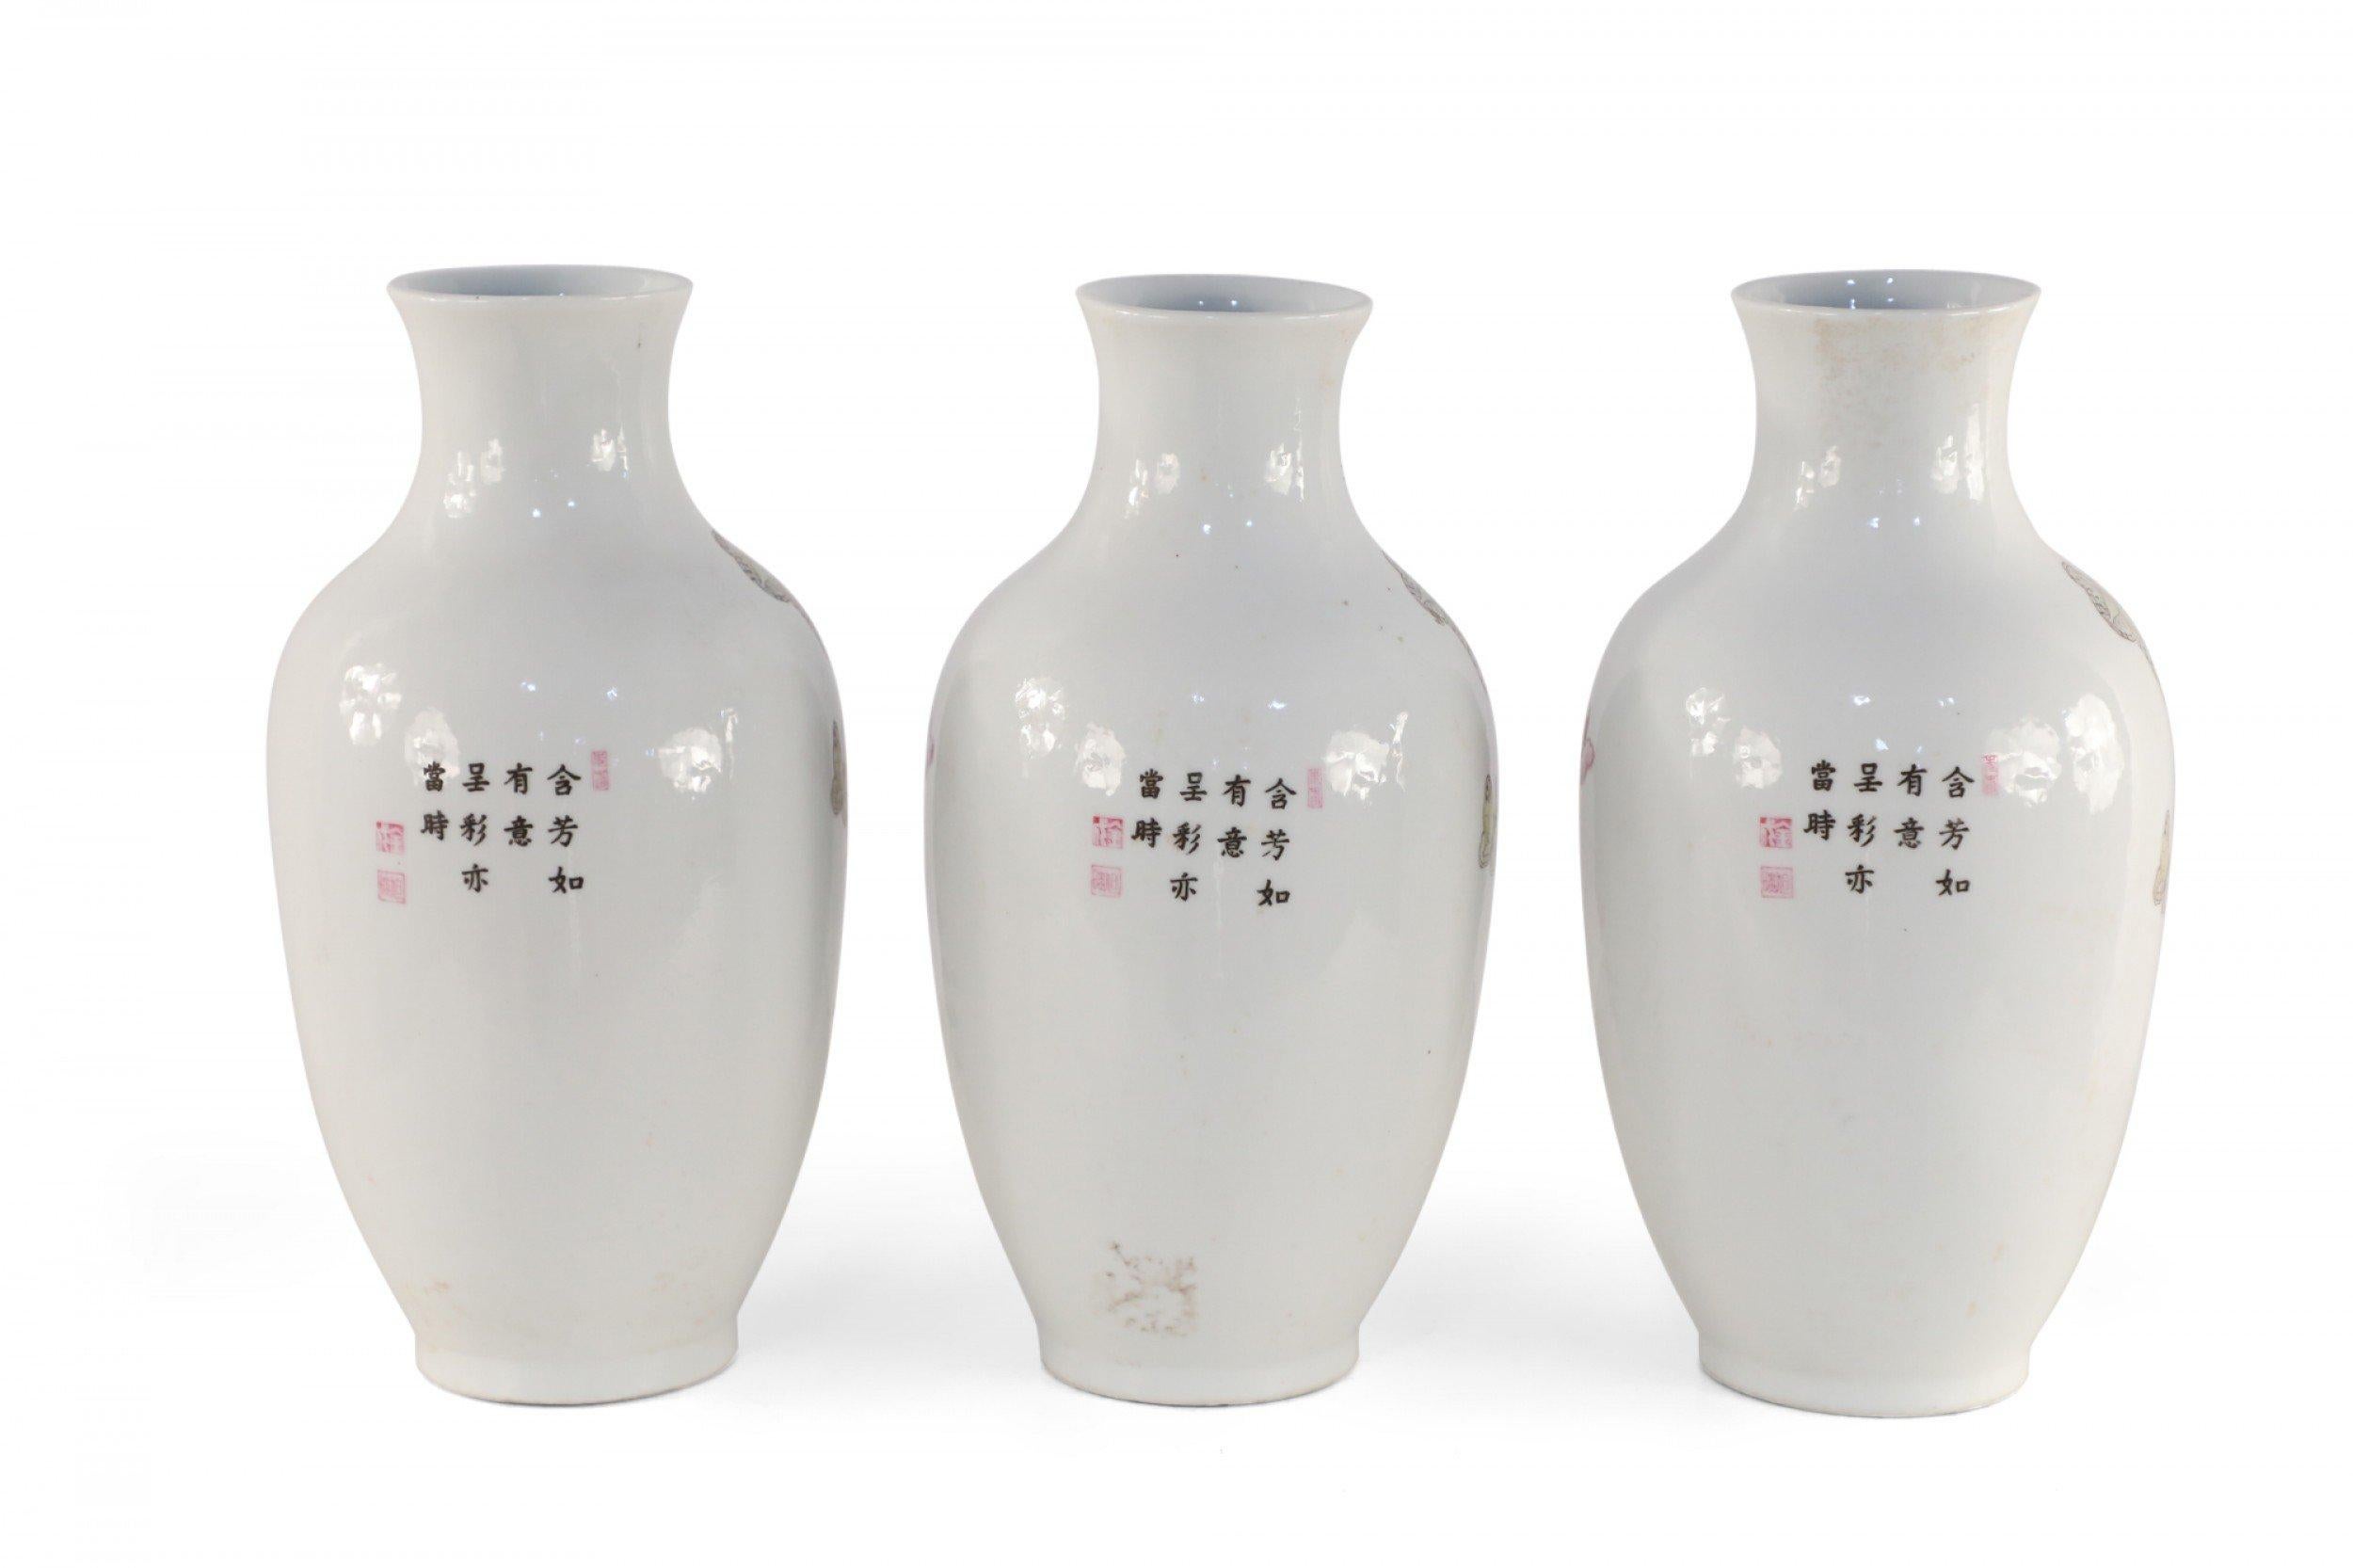 3 Chinese white porcelain vases with pear-shaped forms decorated in butterflies above pink and orange florals growing from green leaves on one side with characters on the reverse. (Priced each).
 